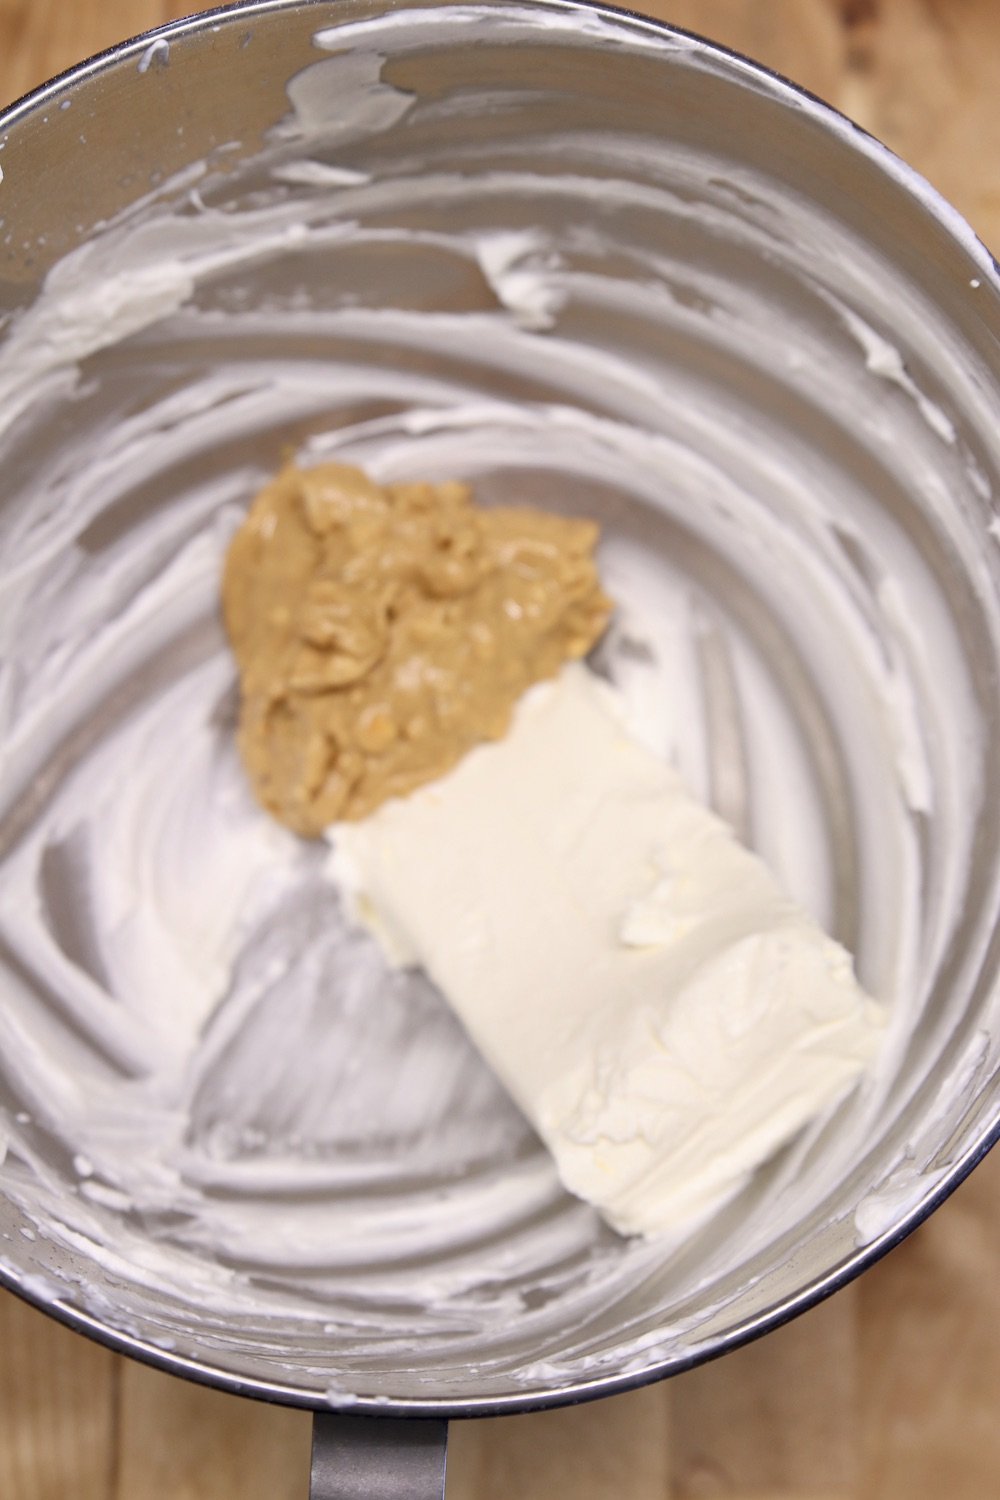 cream cheese and peanut butter in a mixer bowl